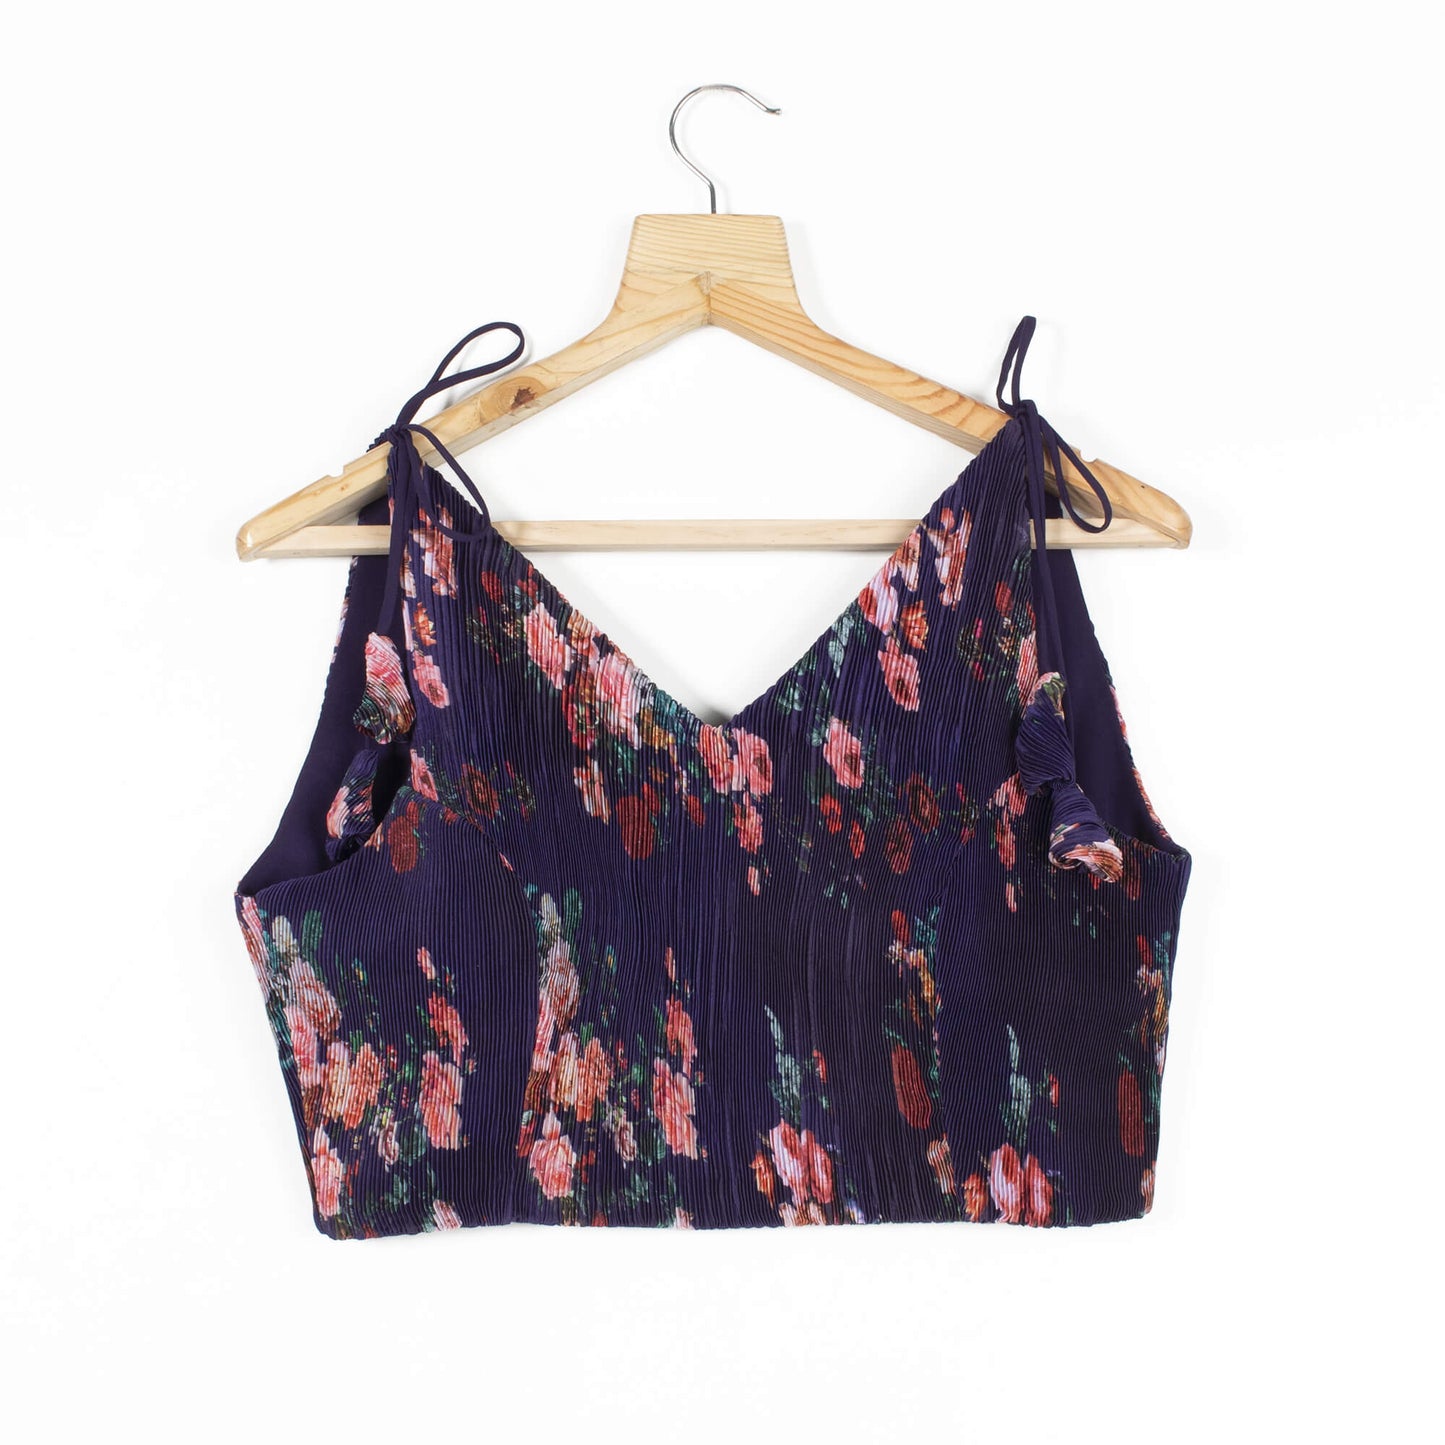 Floral Pleated Satin Spaghetti Tie Up Blouse